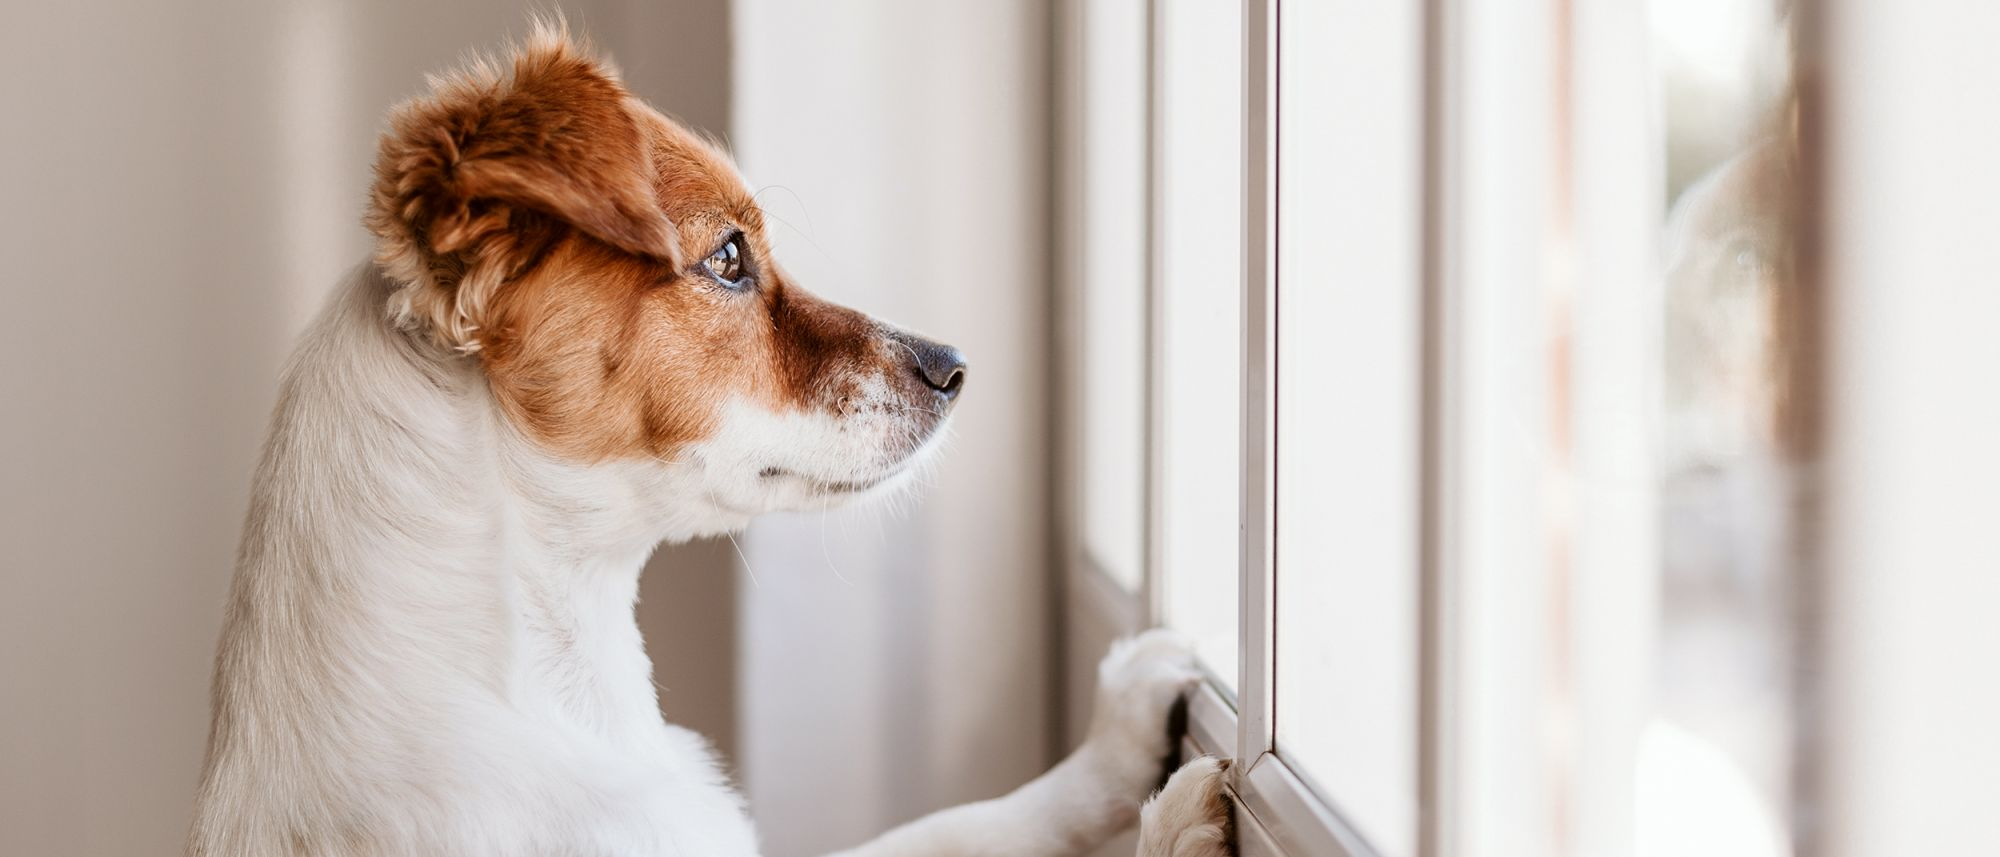 Jack Russel Terrier looking out of a window